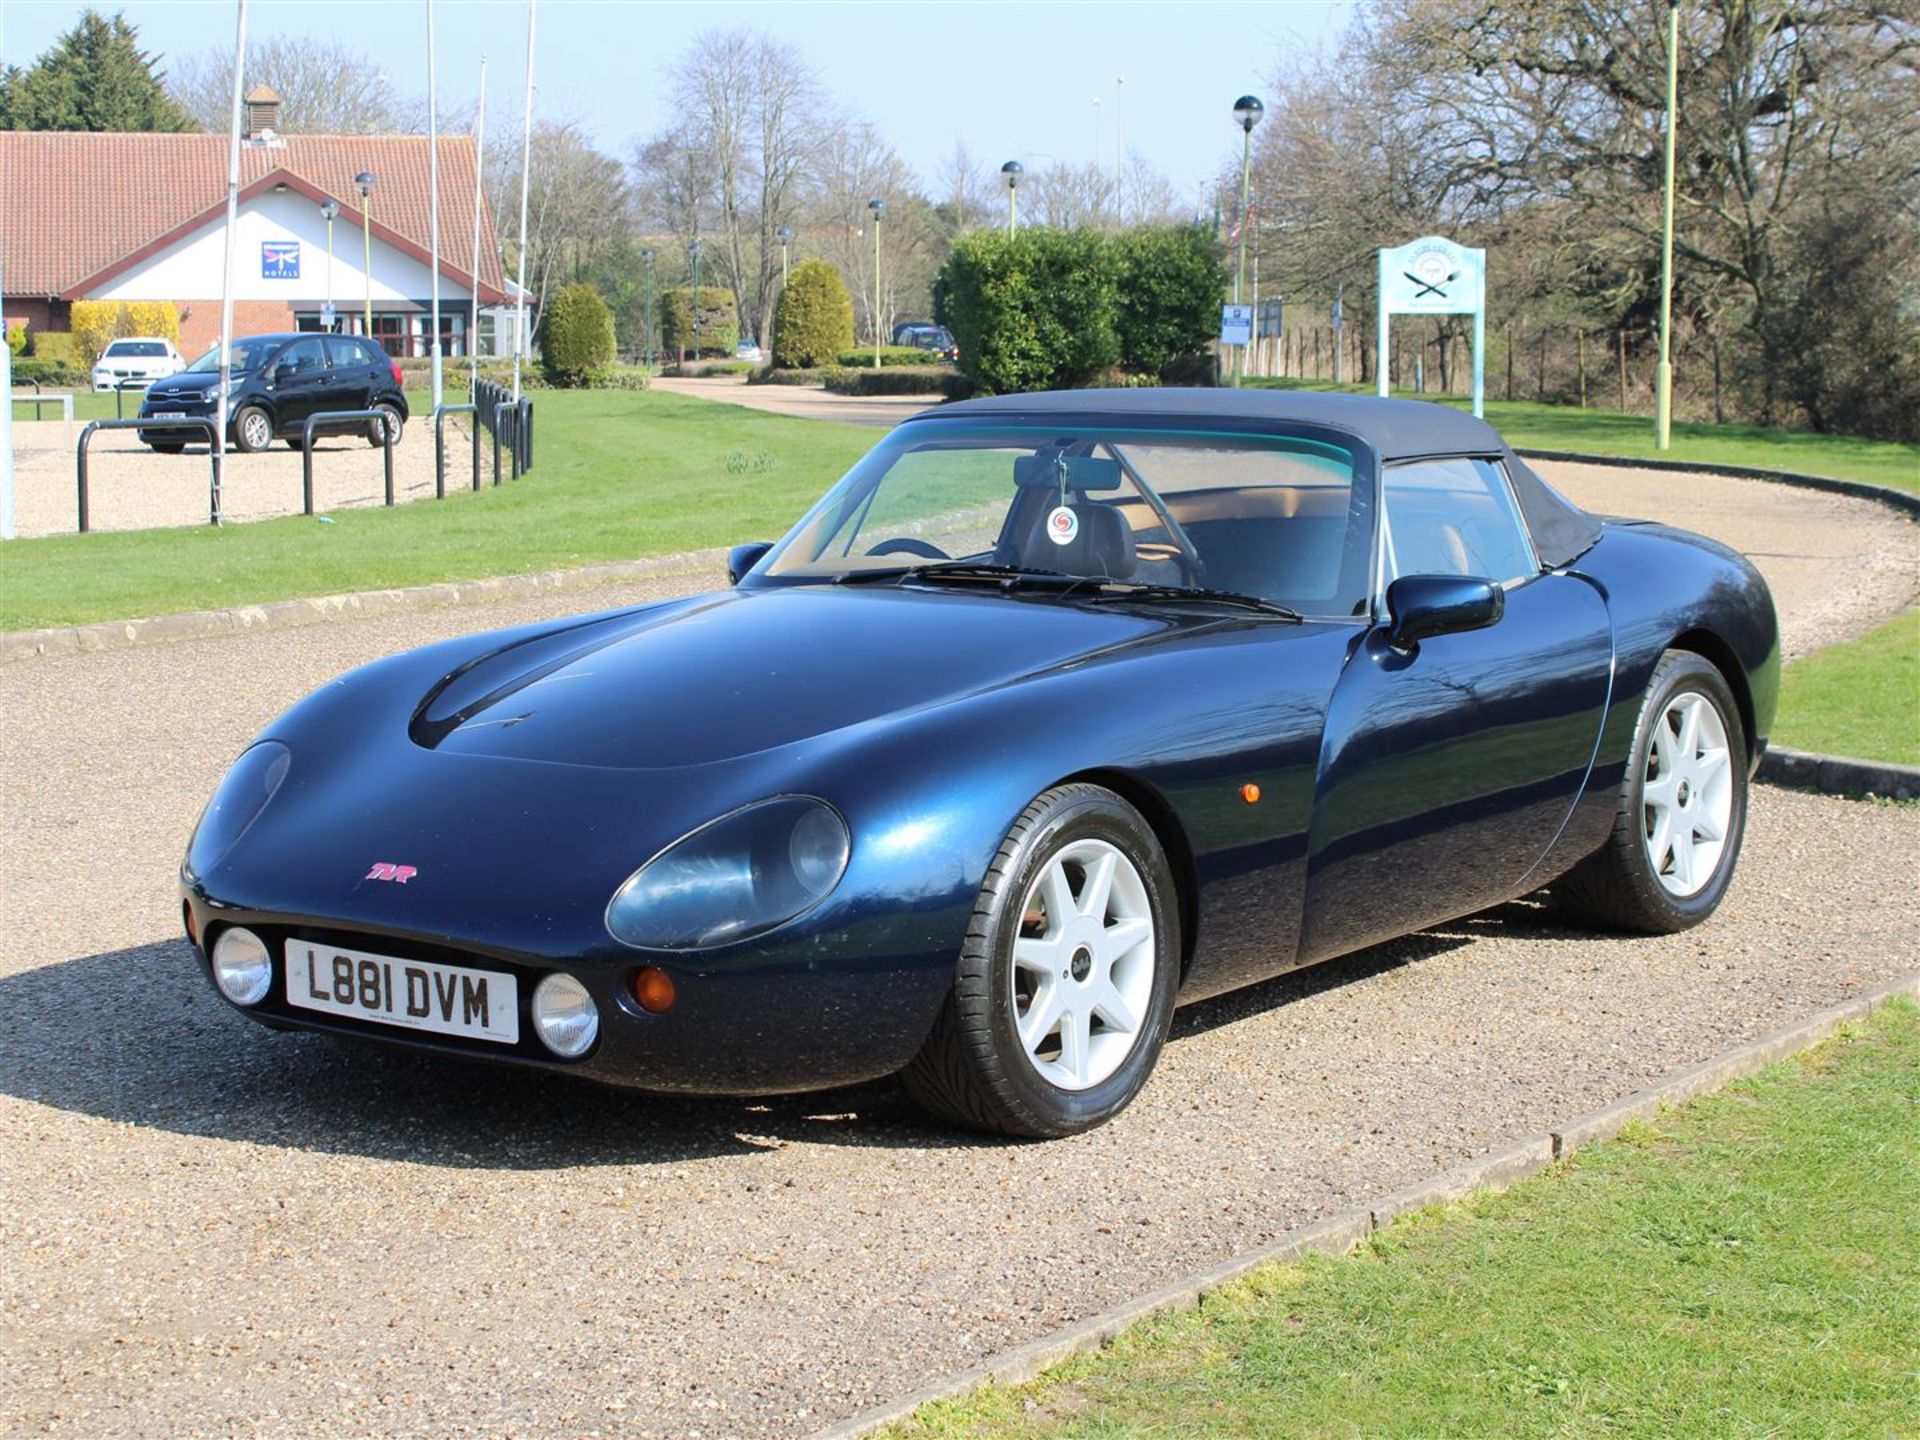 1993 TVR Griffith 500 - Image 2 of 19